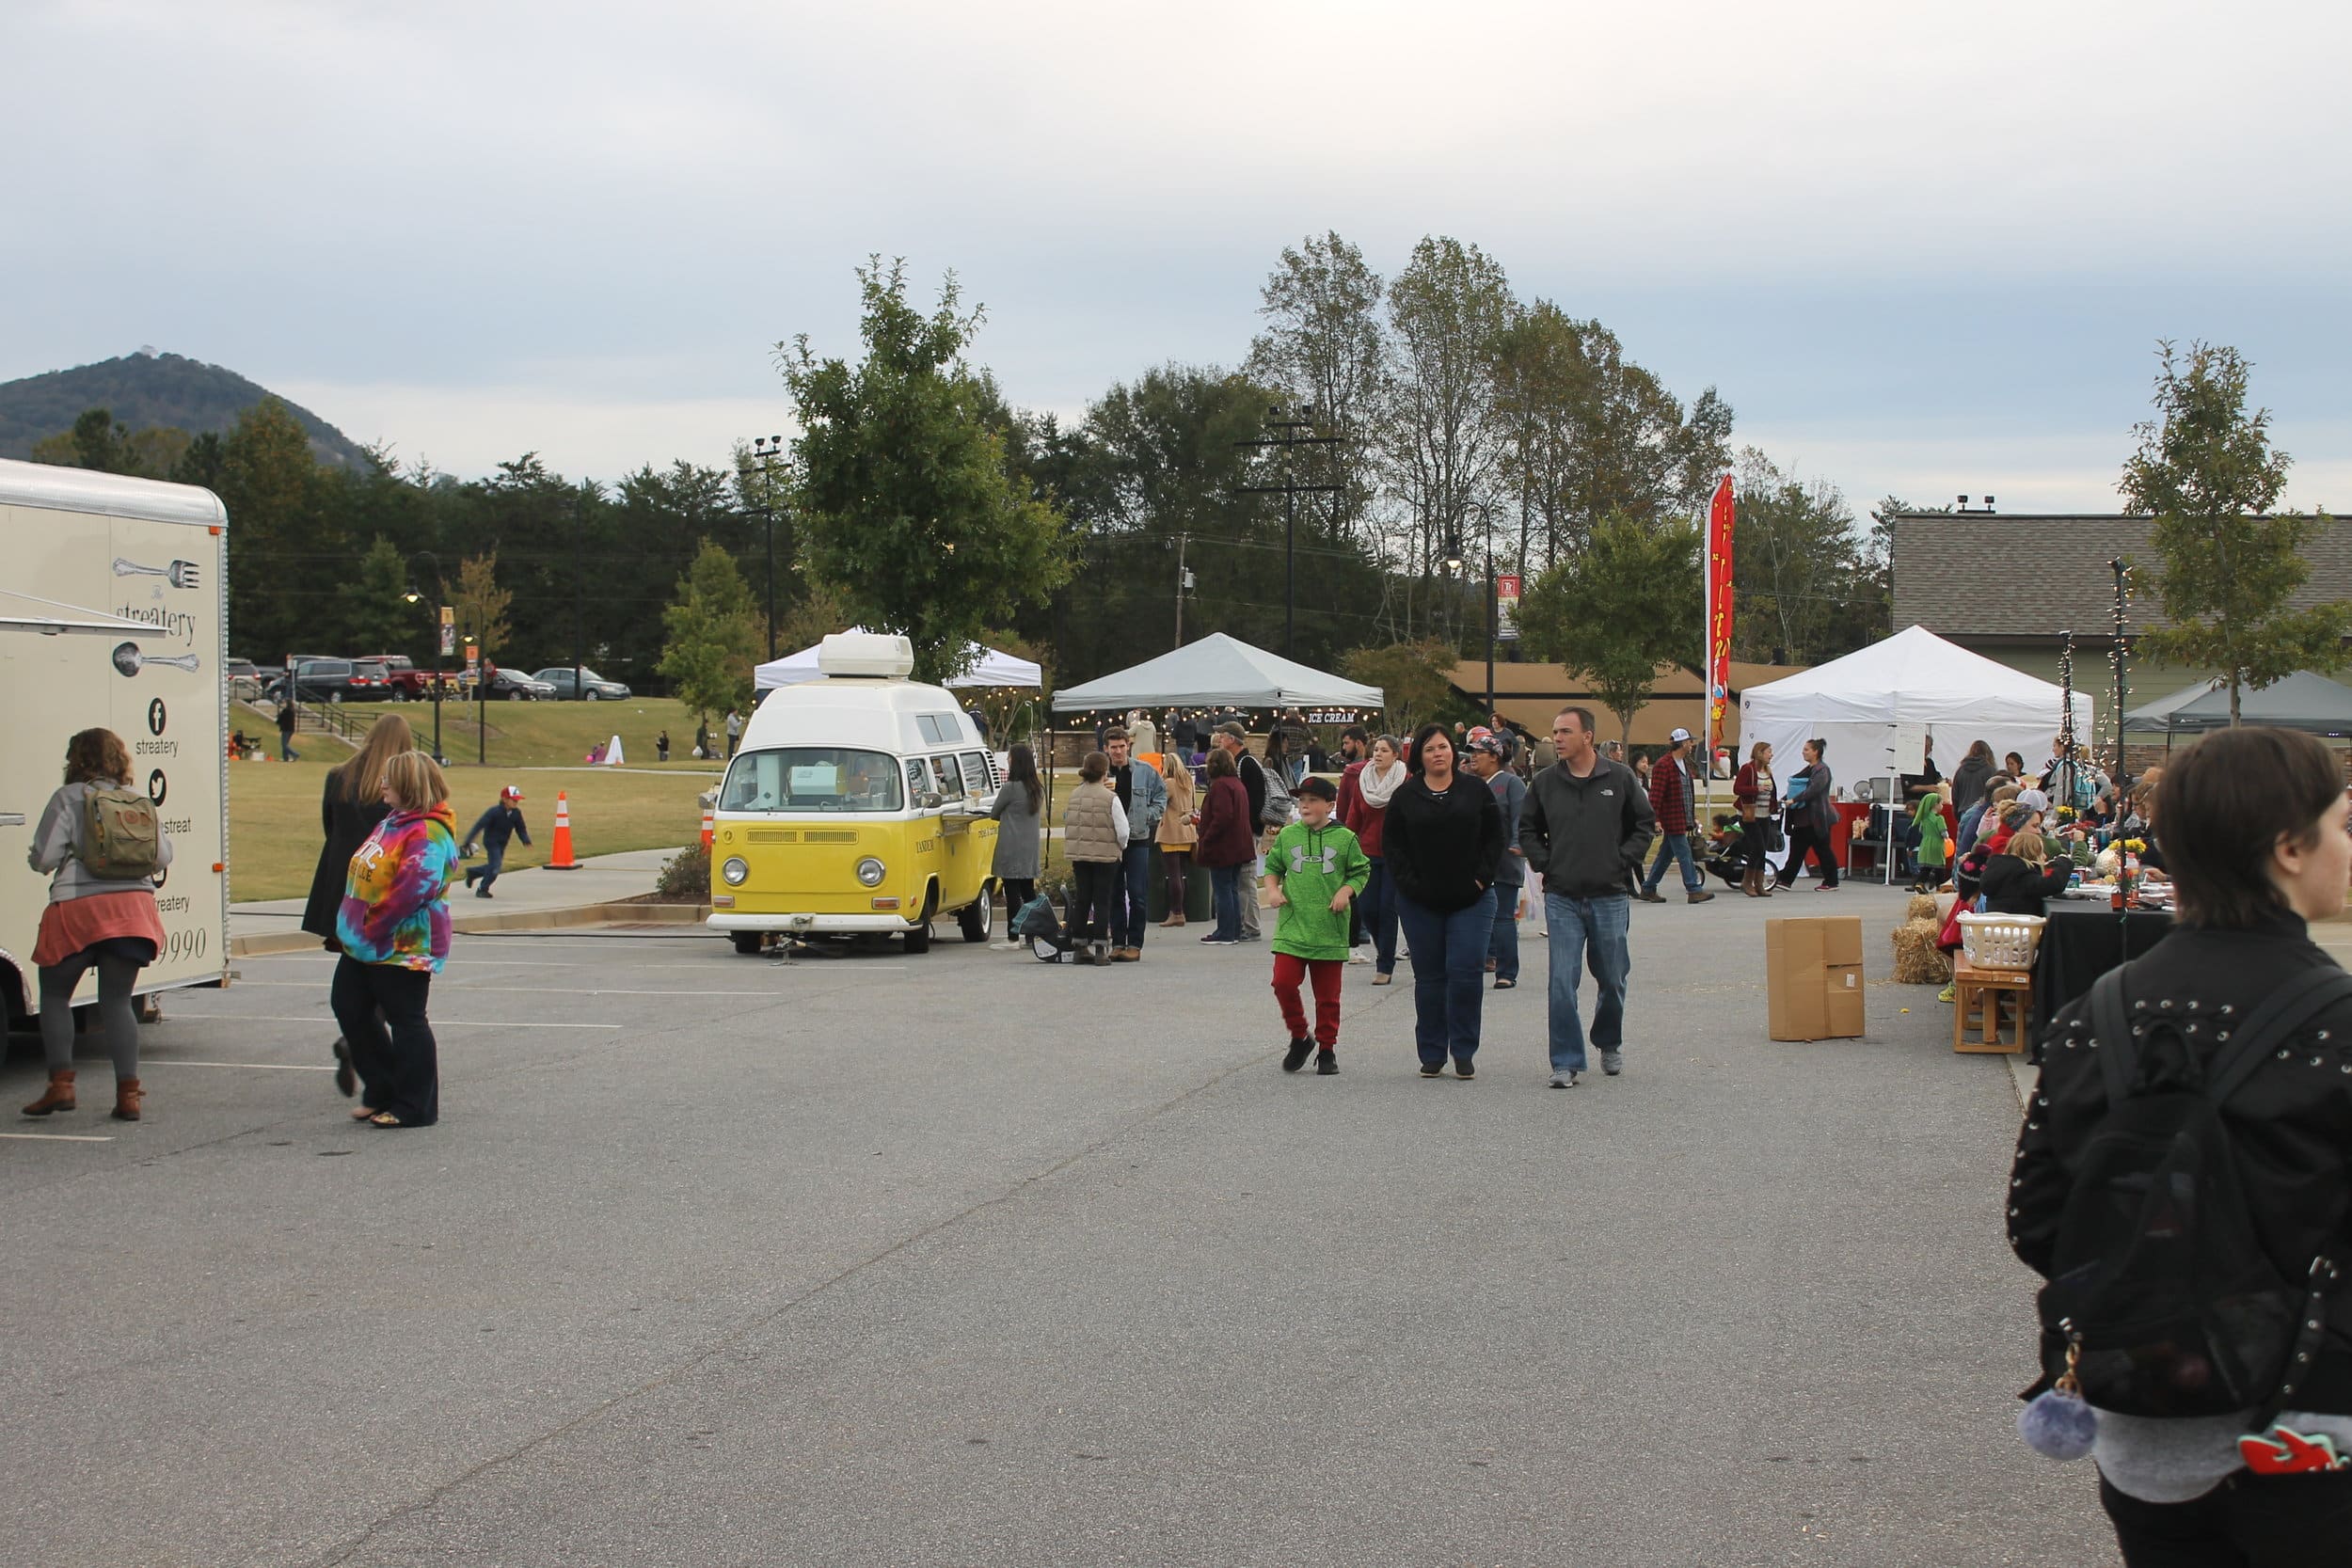 Travelers Rest, SC commenced their annual fall bluegrass and harvest market on Oct. 25.